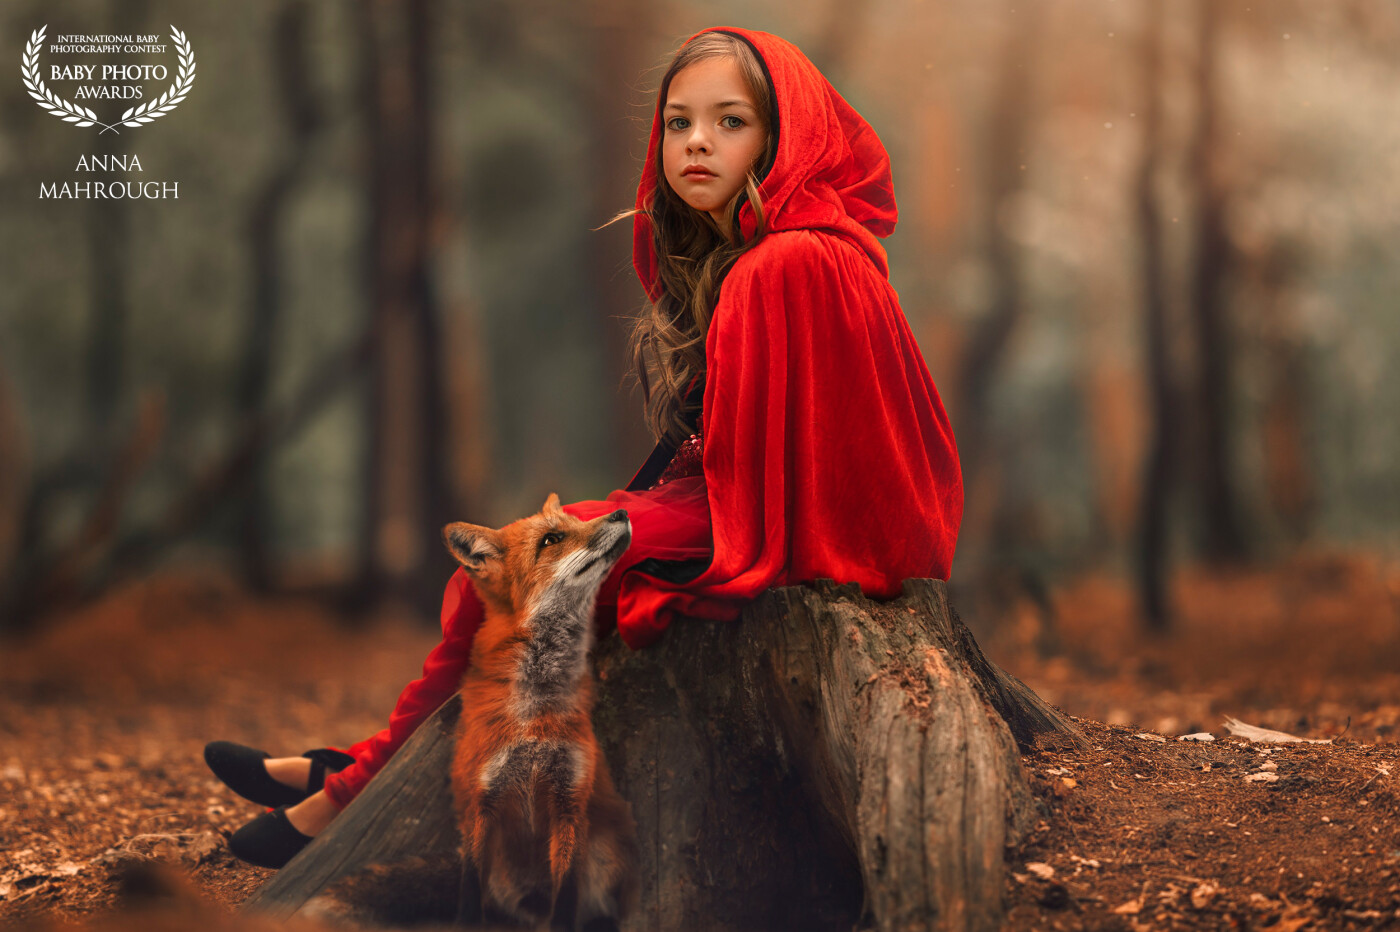 Little red riding hood lost in the forest